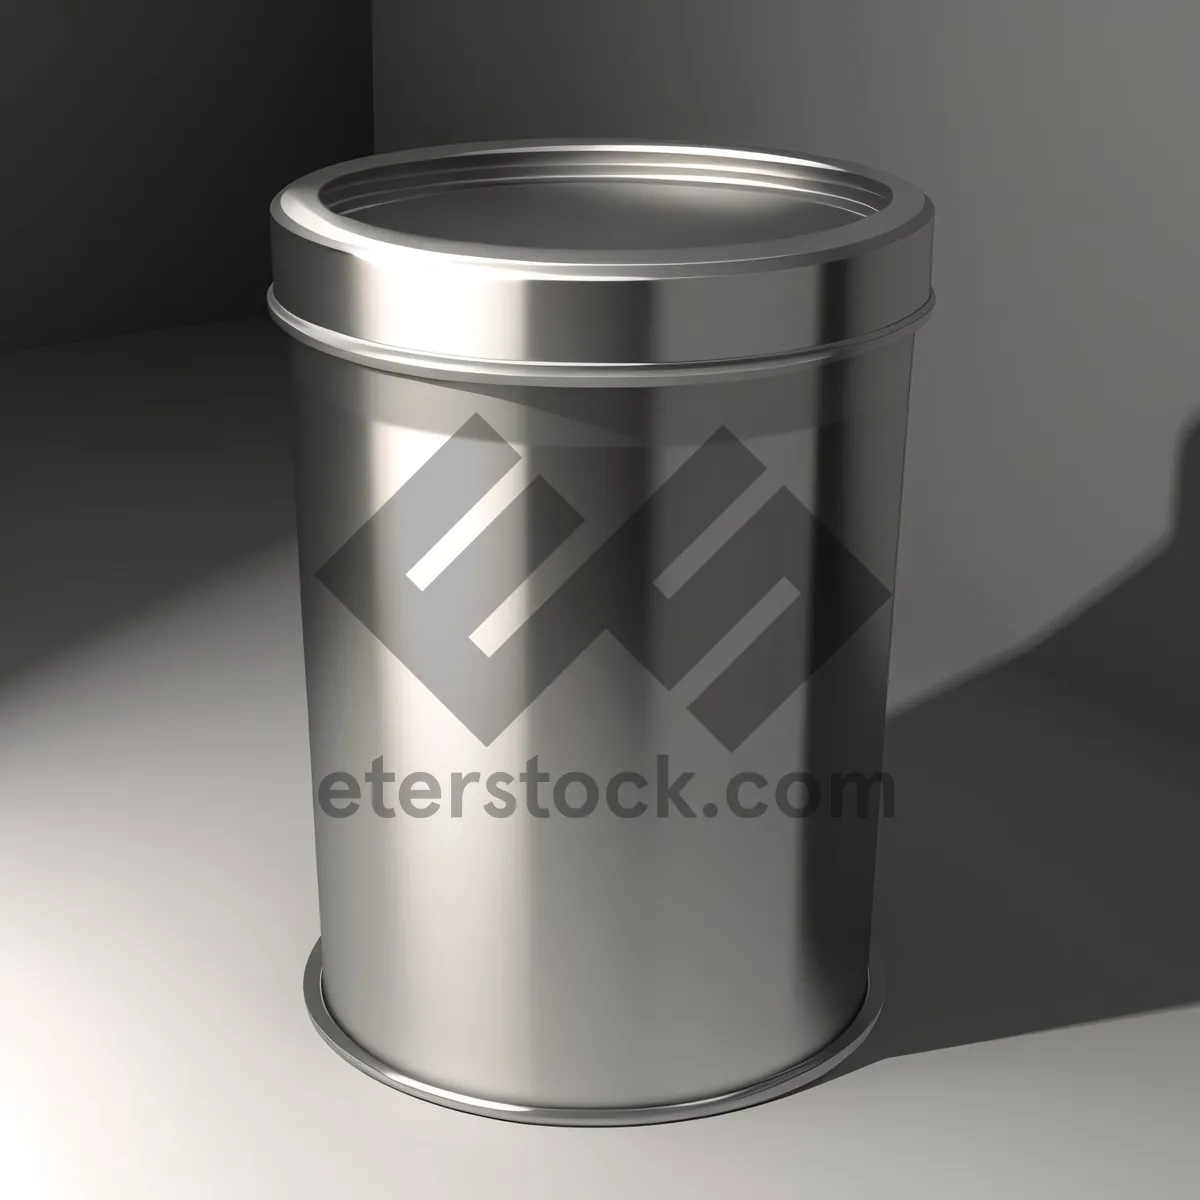 Picture of Silver Metal Drink Can - Empty Container